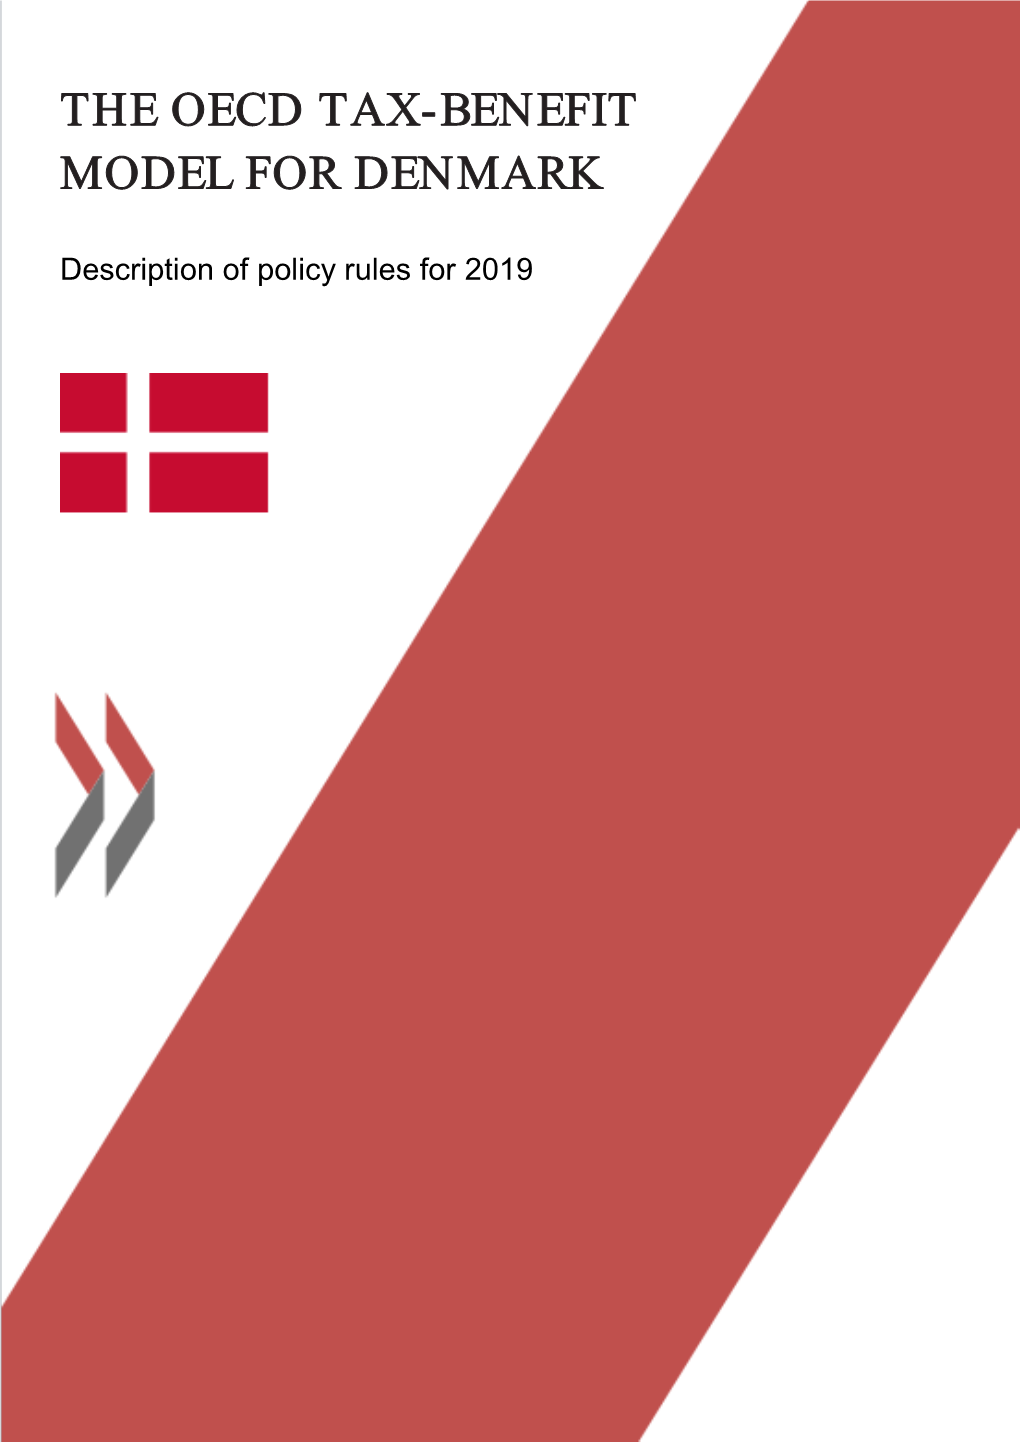 THE OECD TAX-BENEFIT MODEL for DENMARK Description of Policy Rules for 2019